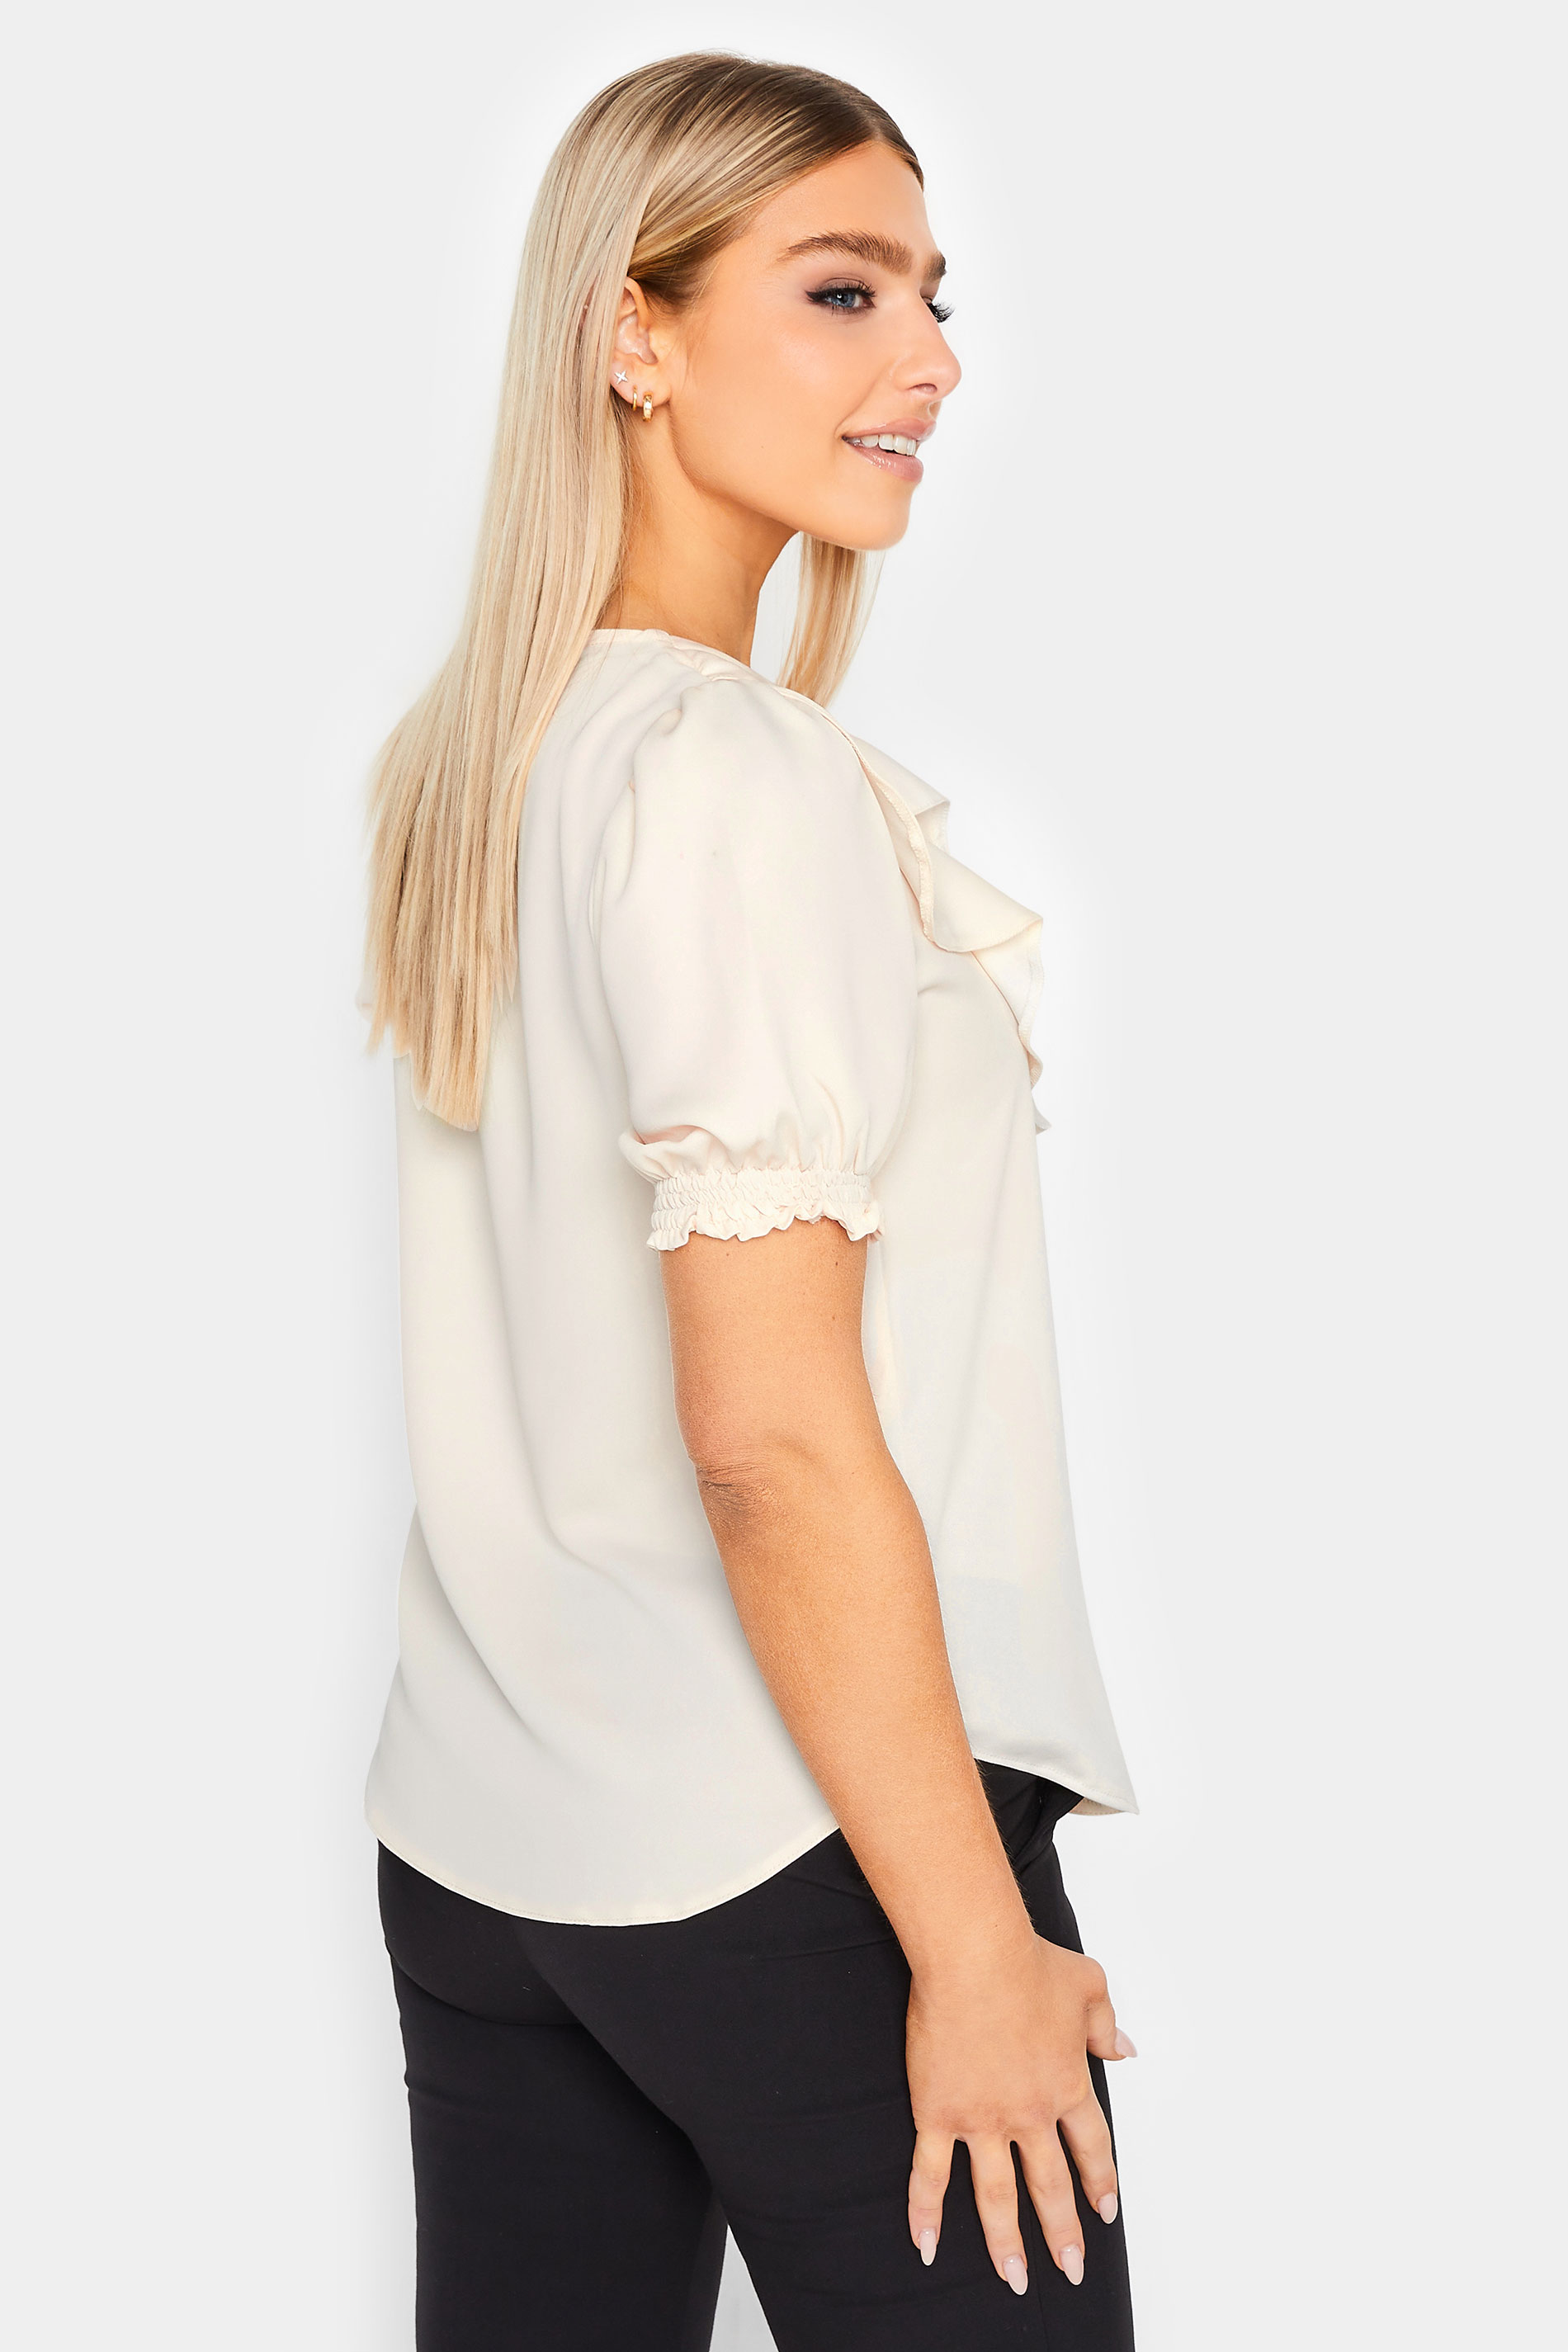 M&Co Ivory White Frill Blouse | M&Co 3